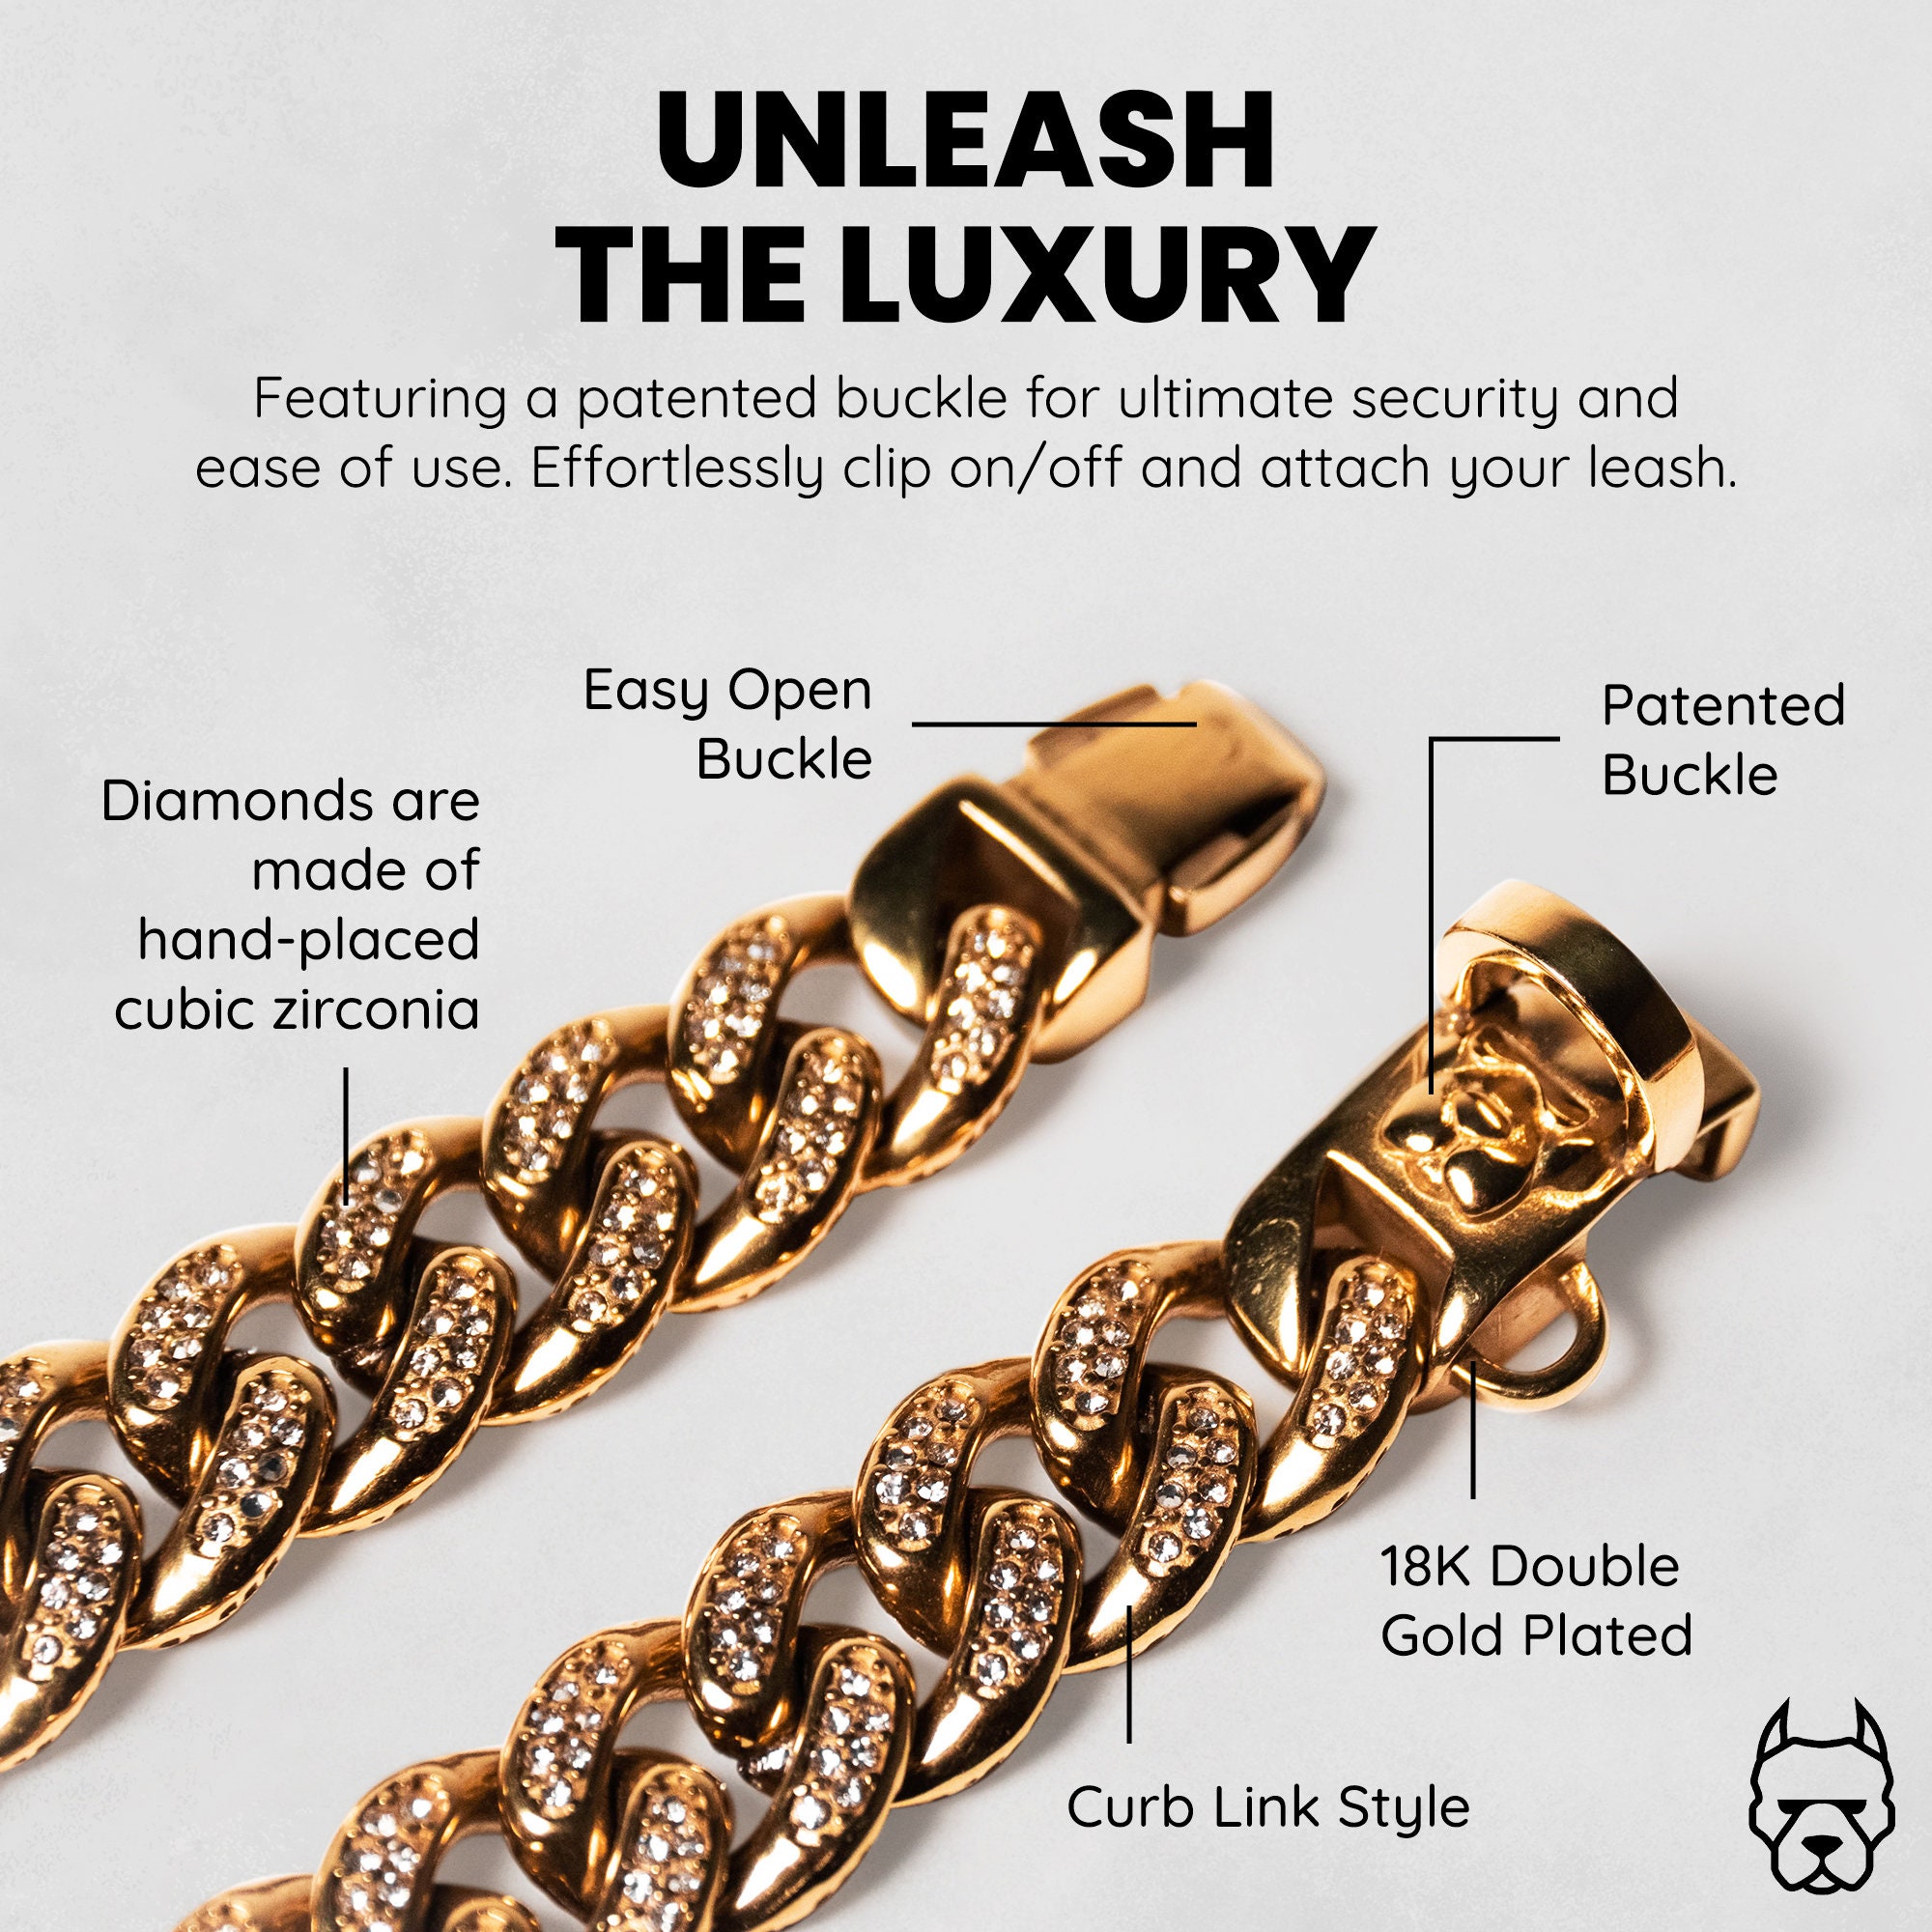  New Gold Chain Dog Collar with Bling Cubic Zirconia Secure  Clasp,15MM Strong Stainless Steel Cuban Link Chain Collars,Luxury Necklace  Walking Collar for Small Medium Dogs : Pet Supplies